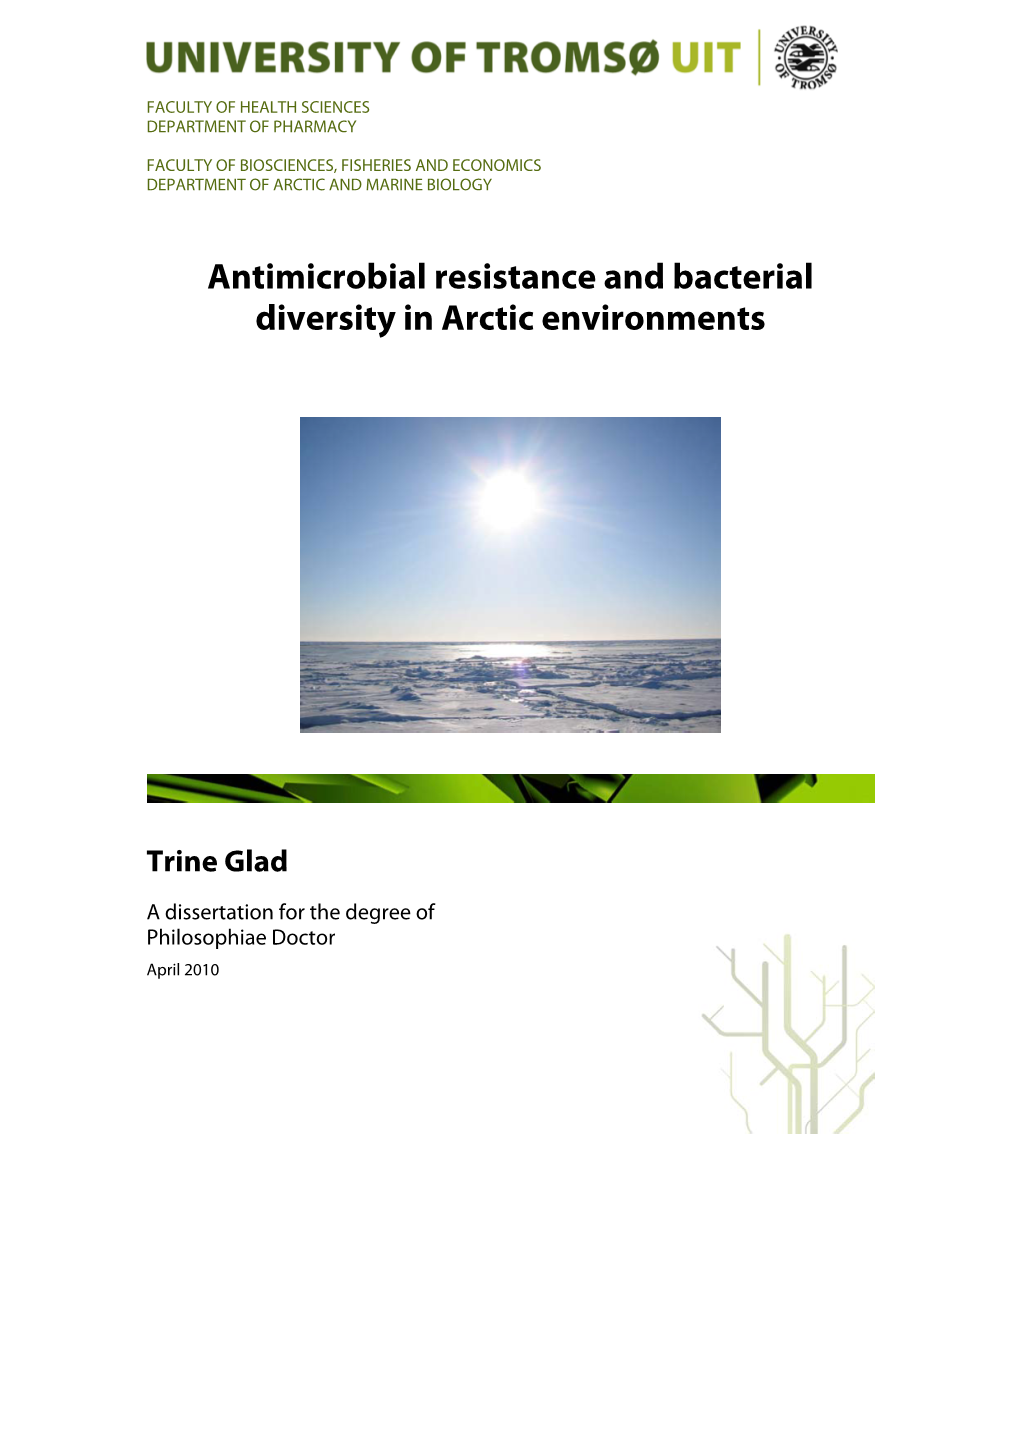 Antimicrobial Resistance and Bacterial Diversity in Arctic Environments